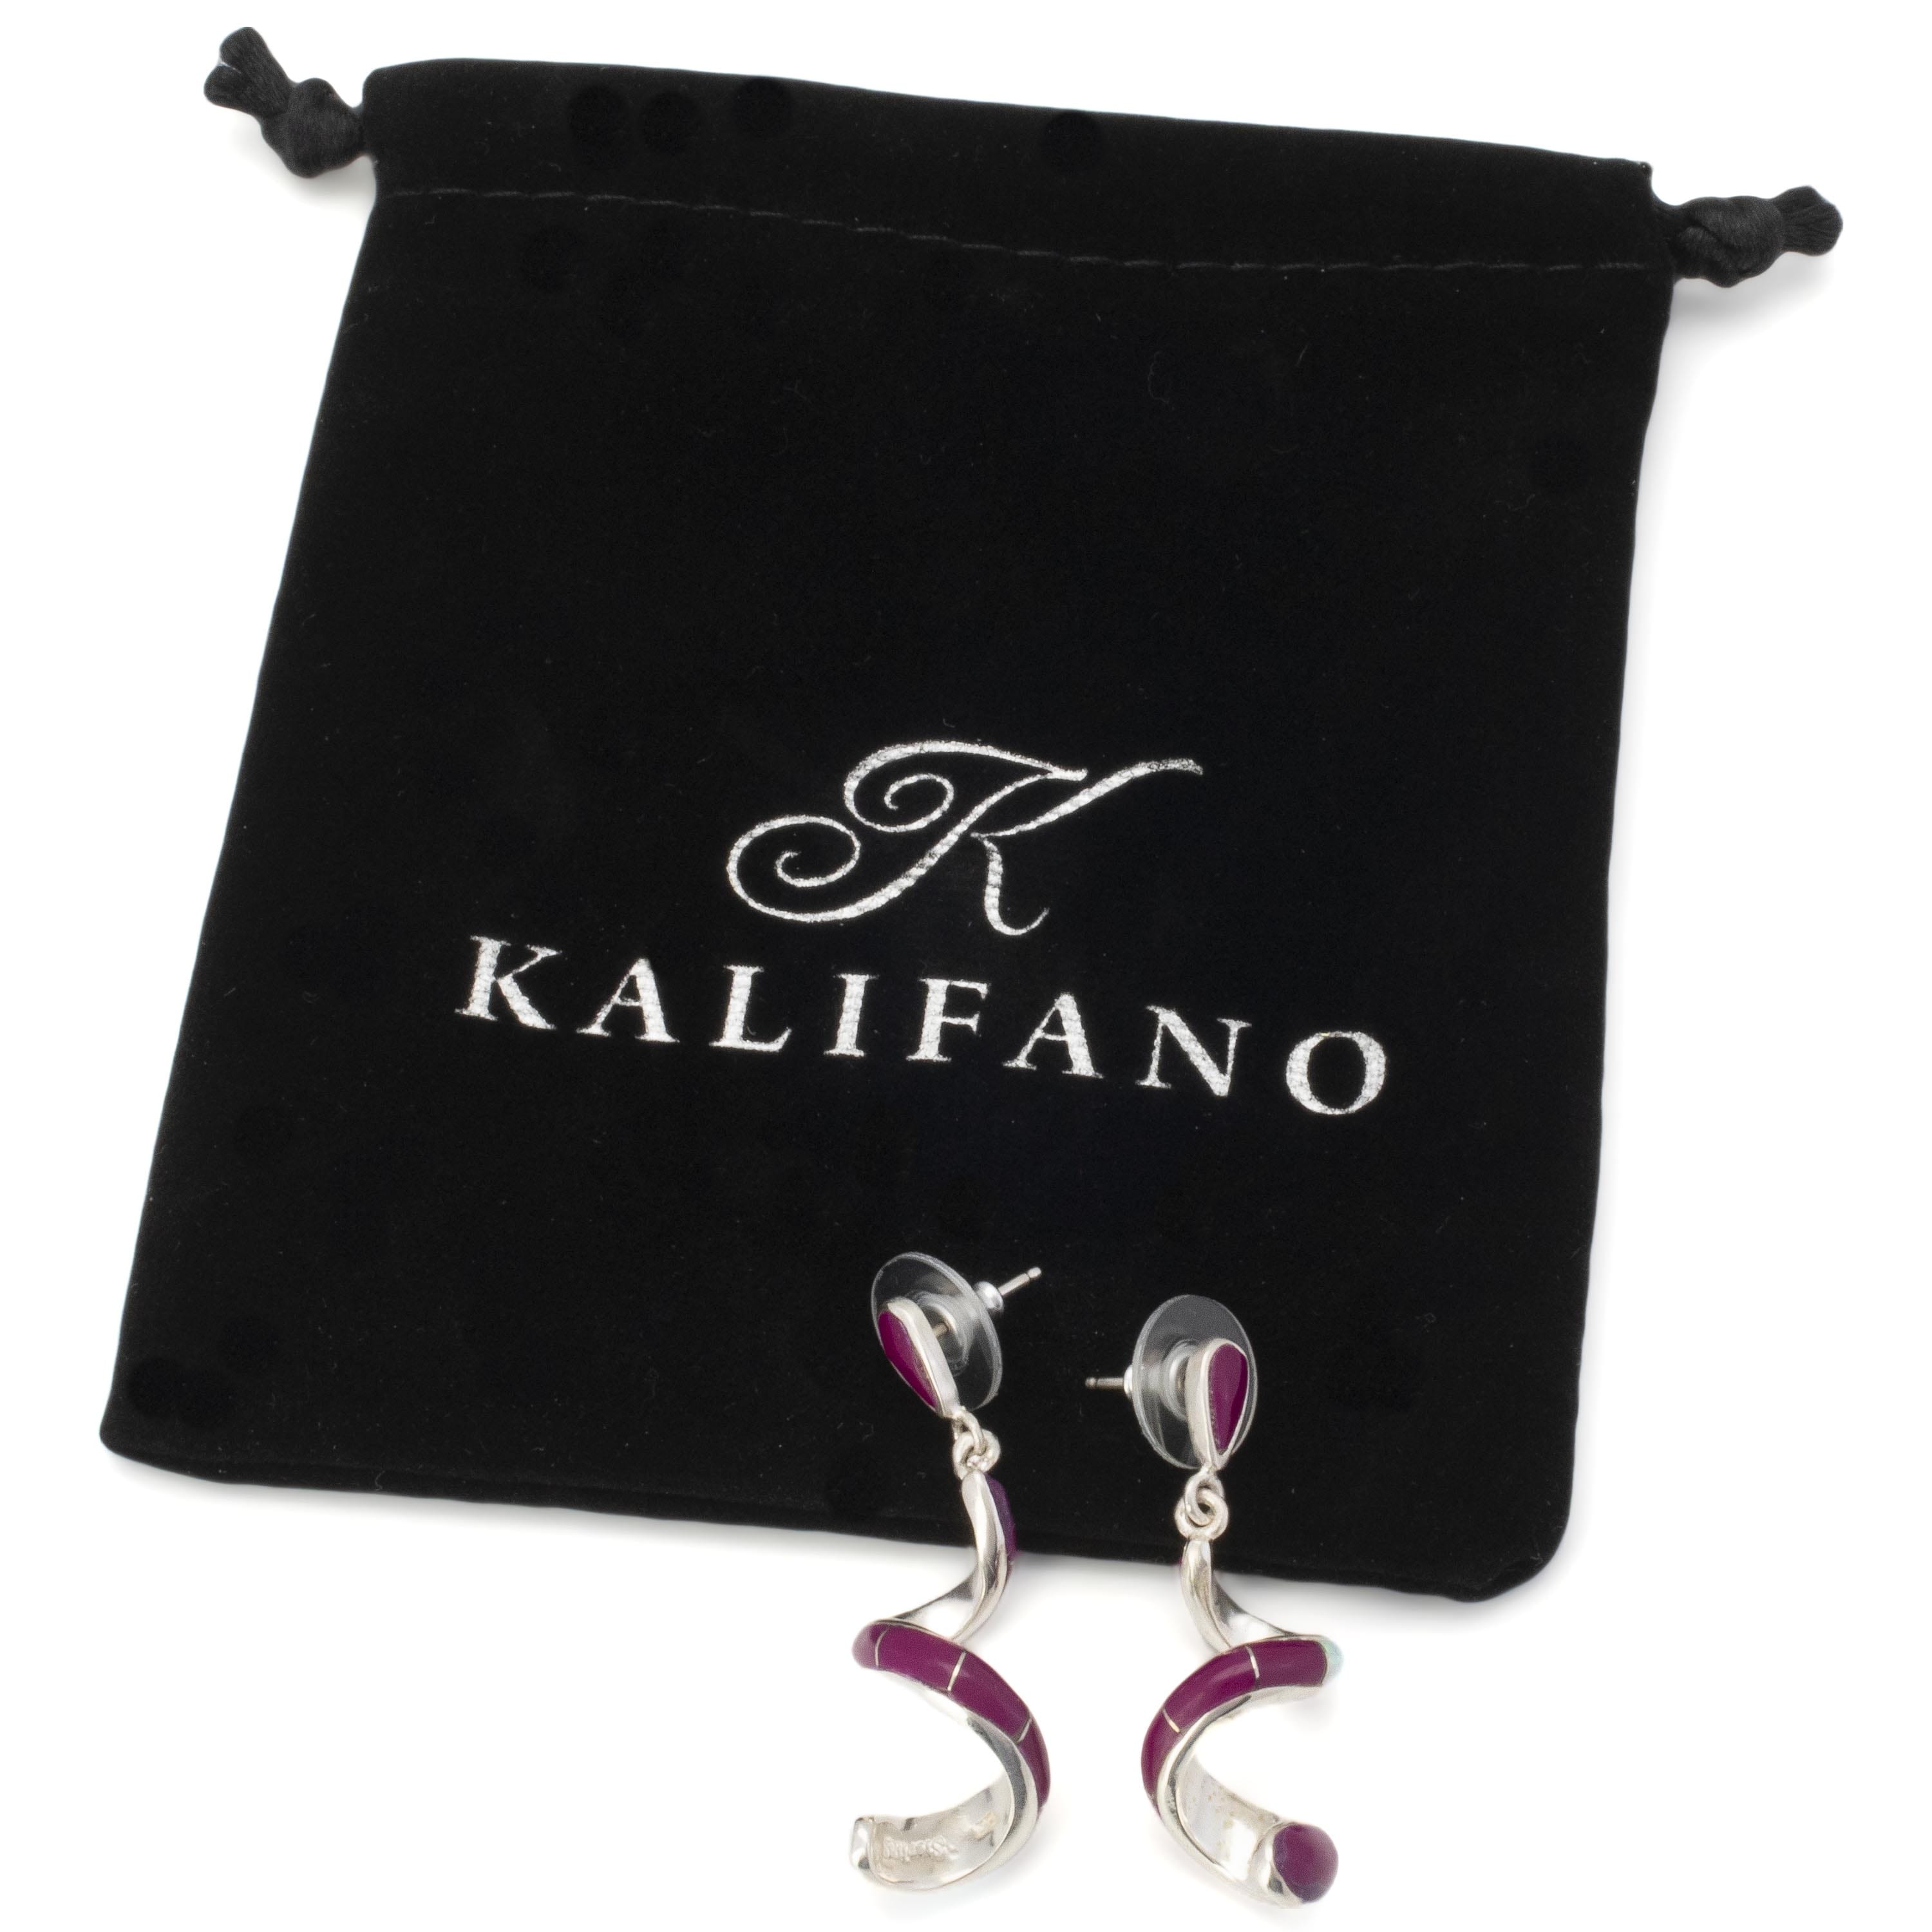 KALIFANO Southwest Silver Jewelry Sugilite Spiral Sterling Silver Earrings with Stud Backing USA Handmade with Opal Accent NME.0416.SG